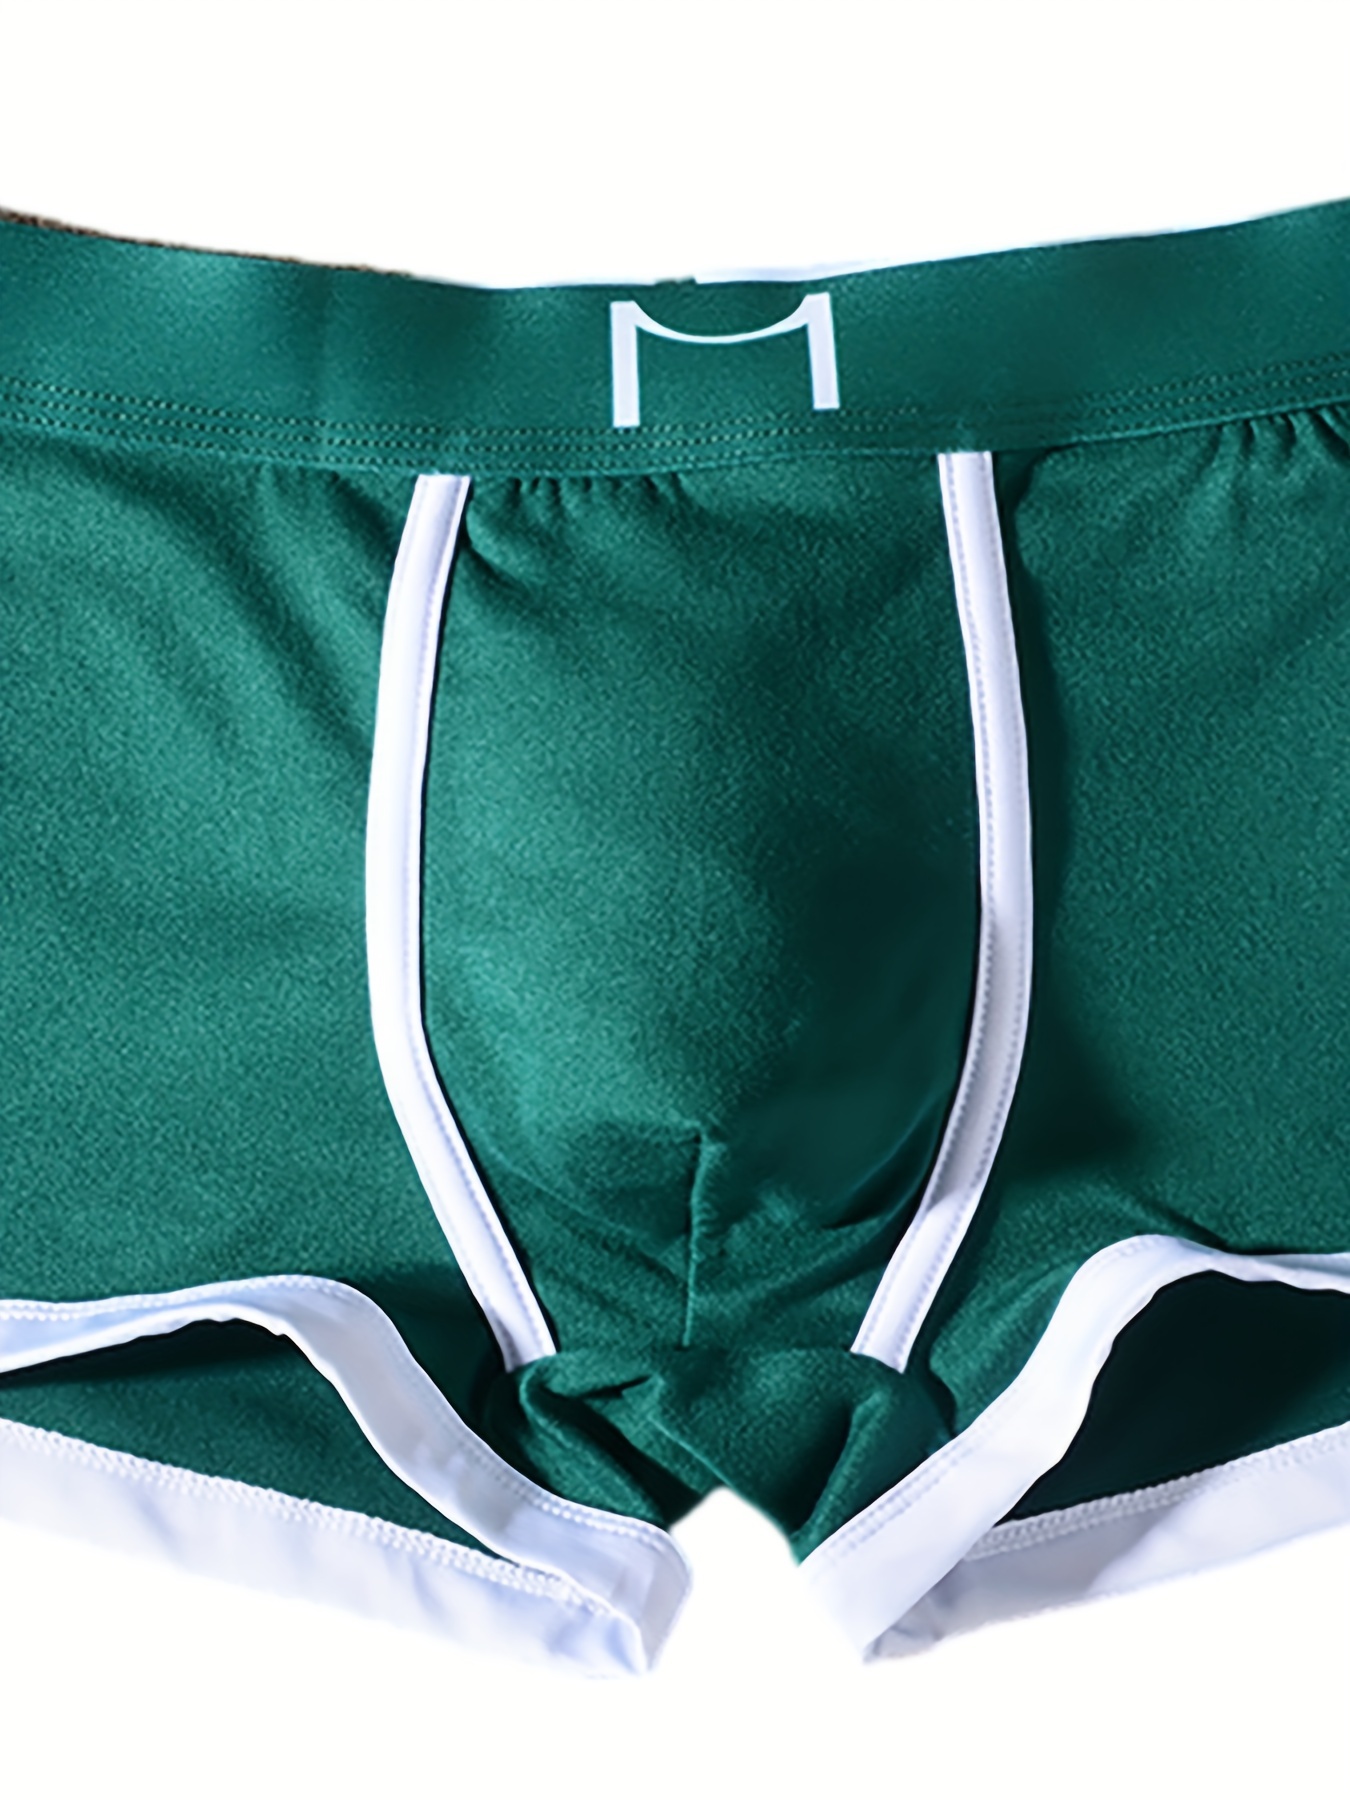 4 PROVEN REASONS YOU SHOULD WEAR BOXER BRIEFS - Smiley Socks Company